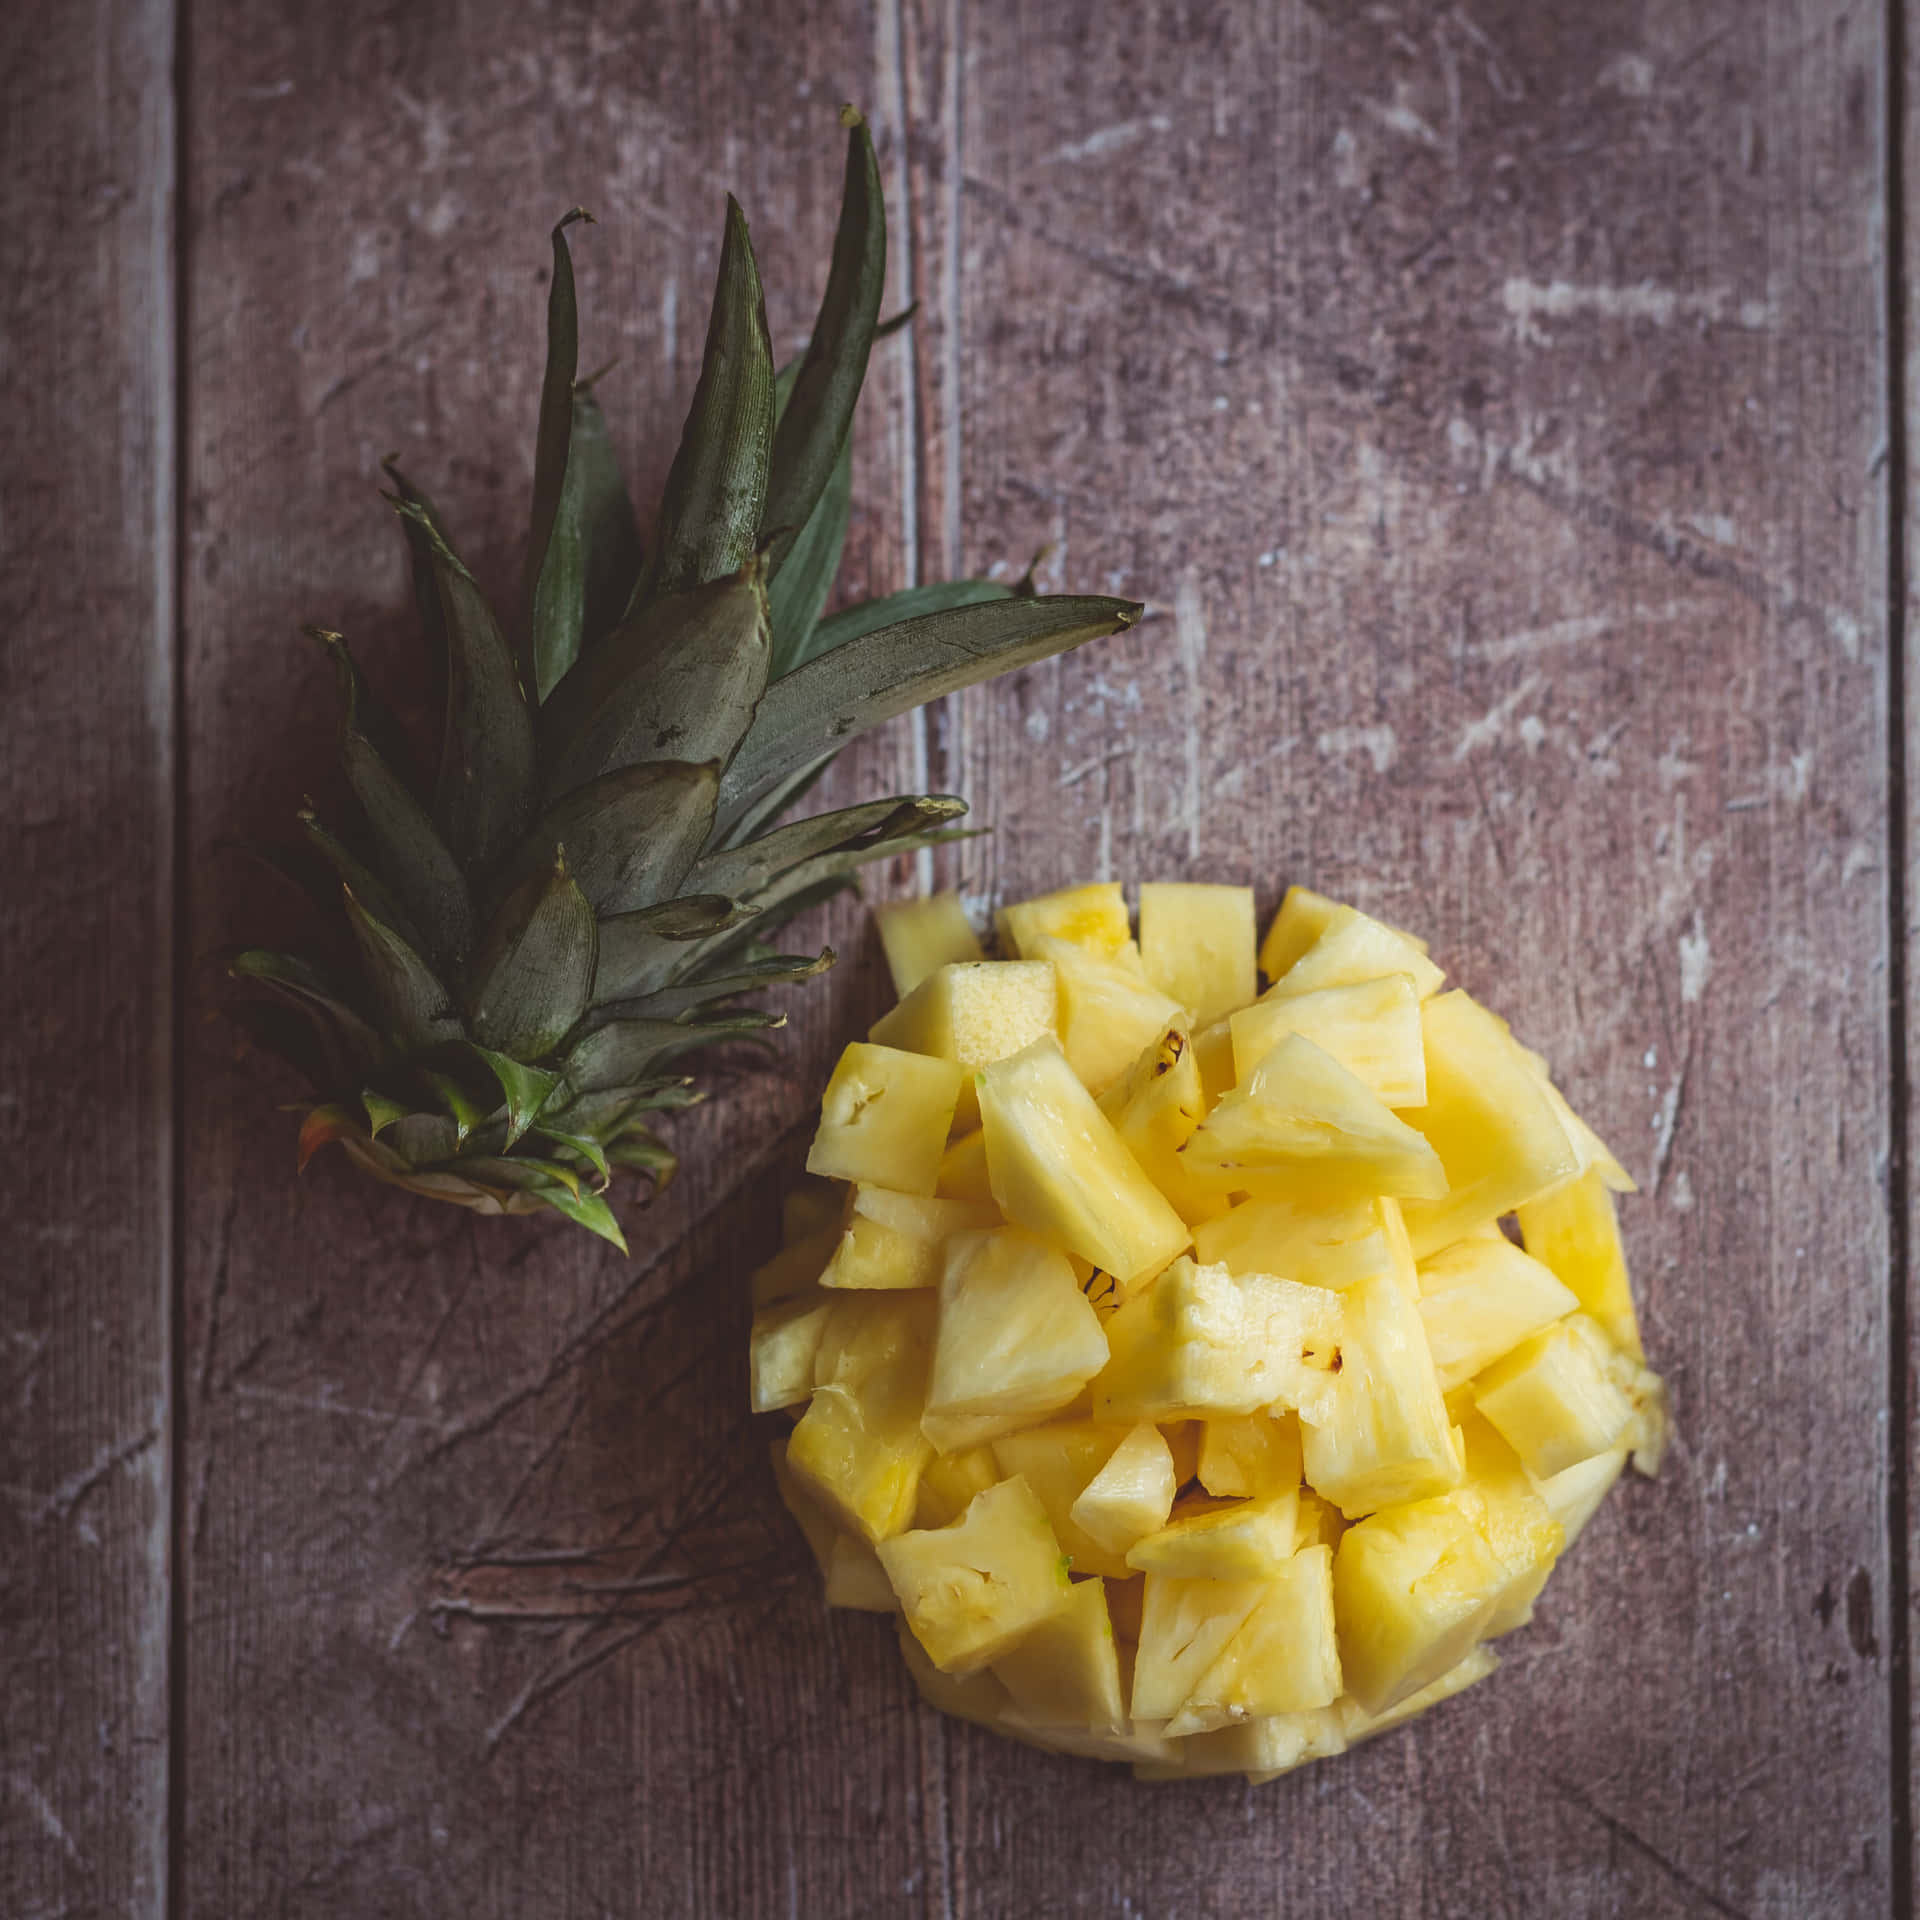 A ripe, golden pineapple set against a white, wooden background.